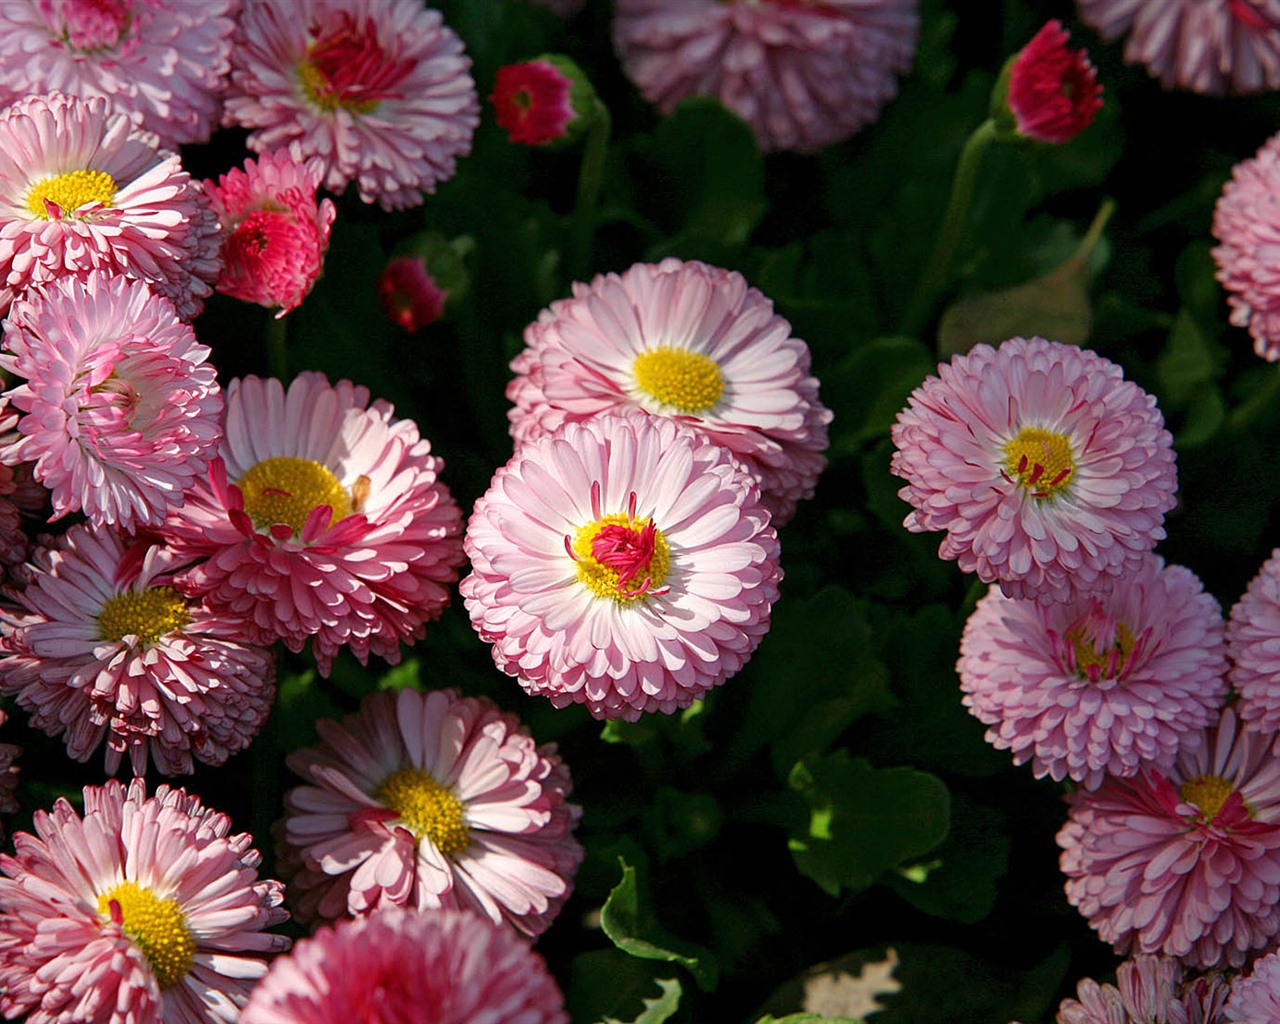 Daisies flowers close-up HD wallpapers #16 - 1280x1024